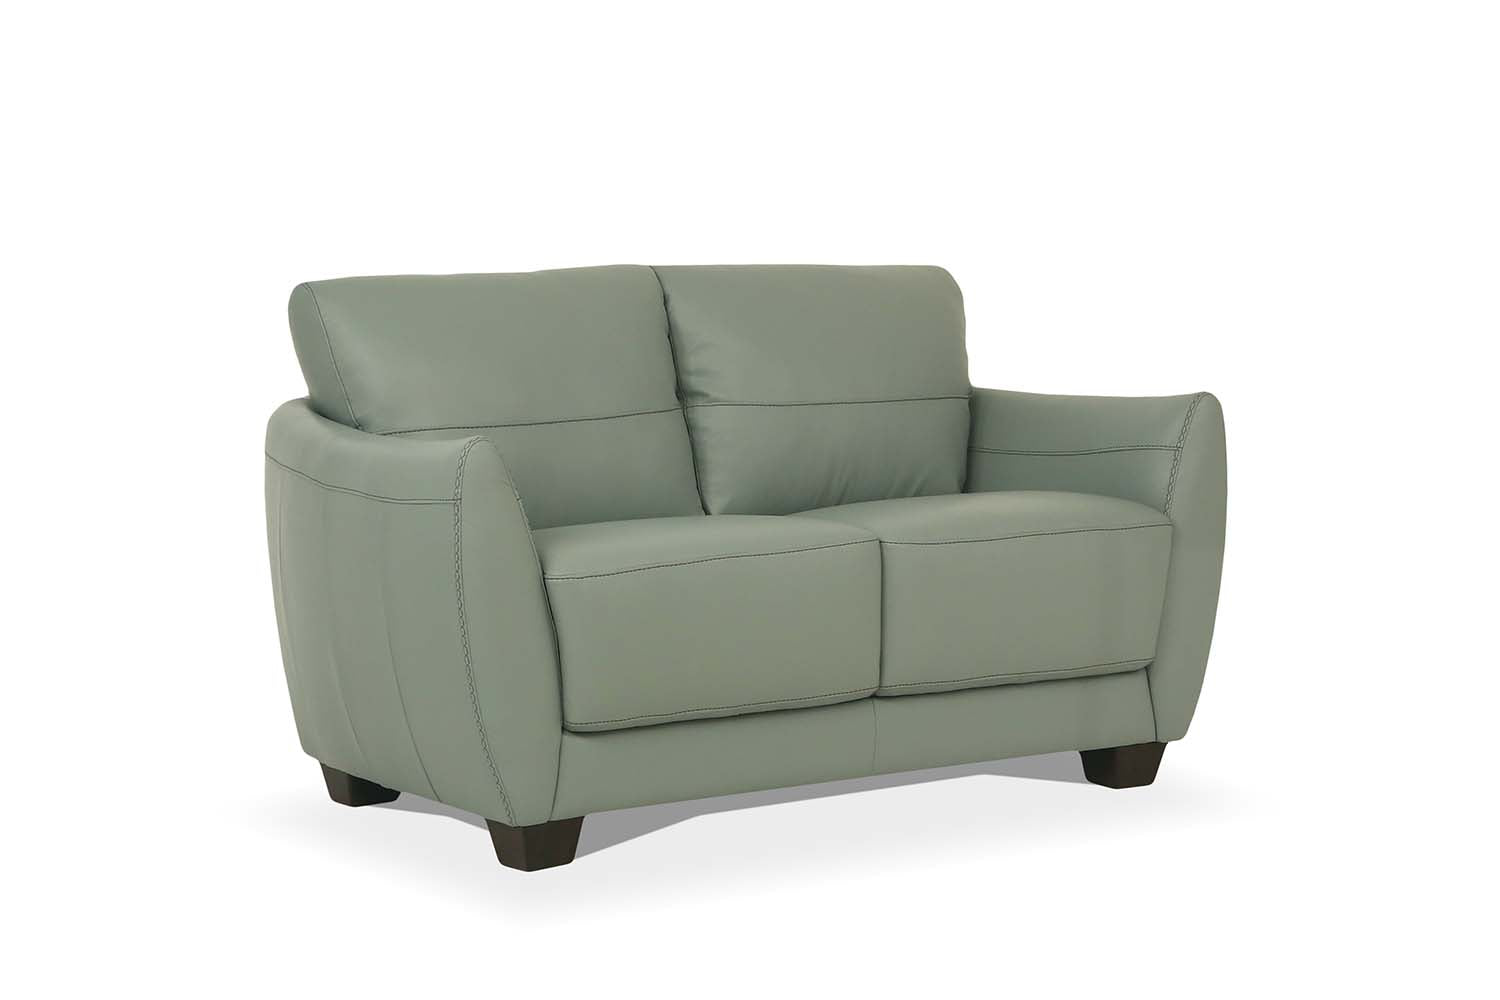 ACME Furniture Sofas & Couches - Loveseat, Watery Leather 54951